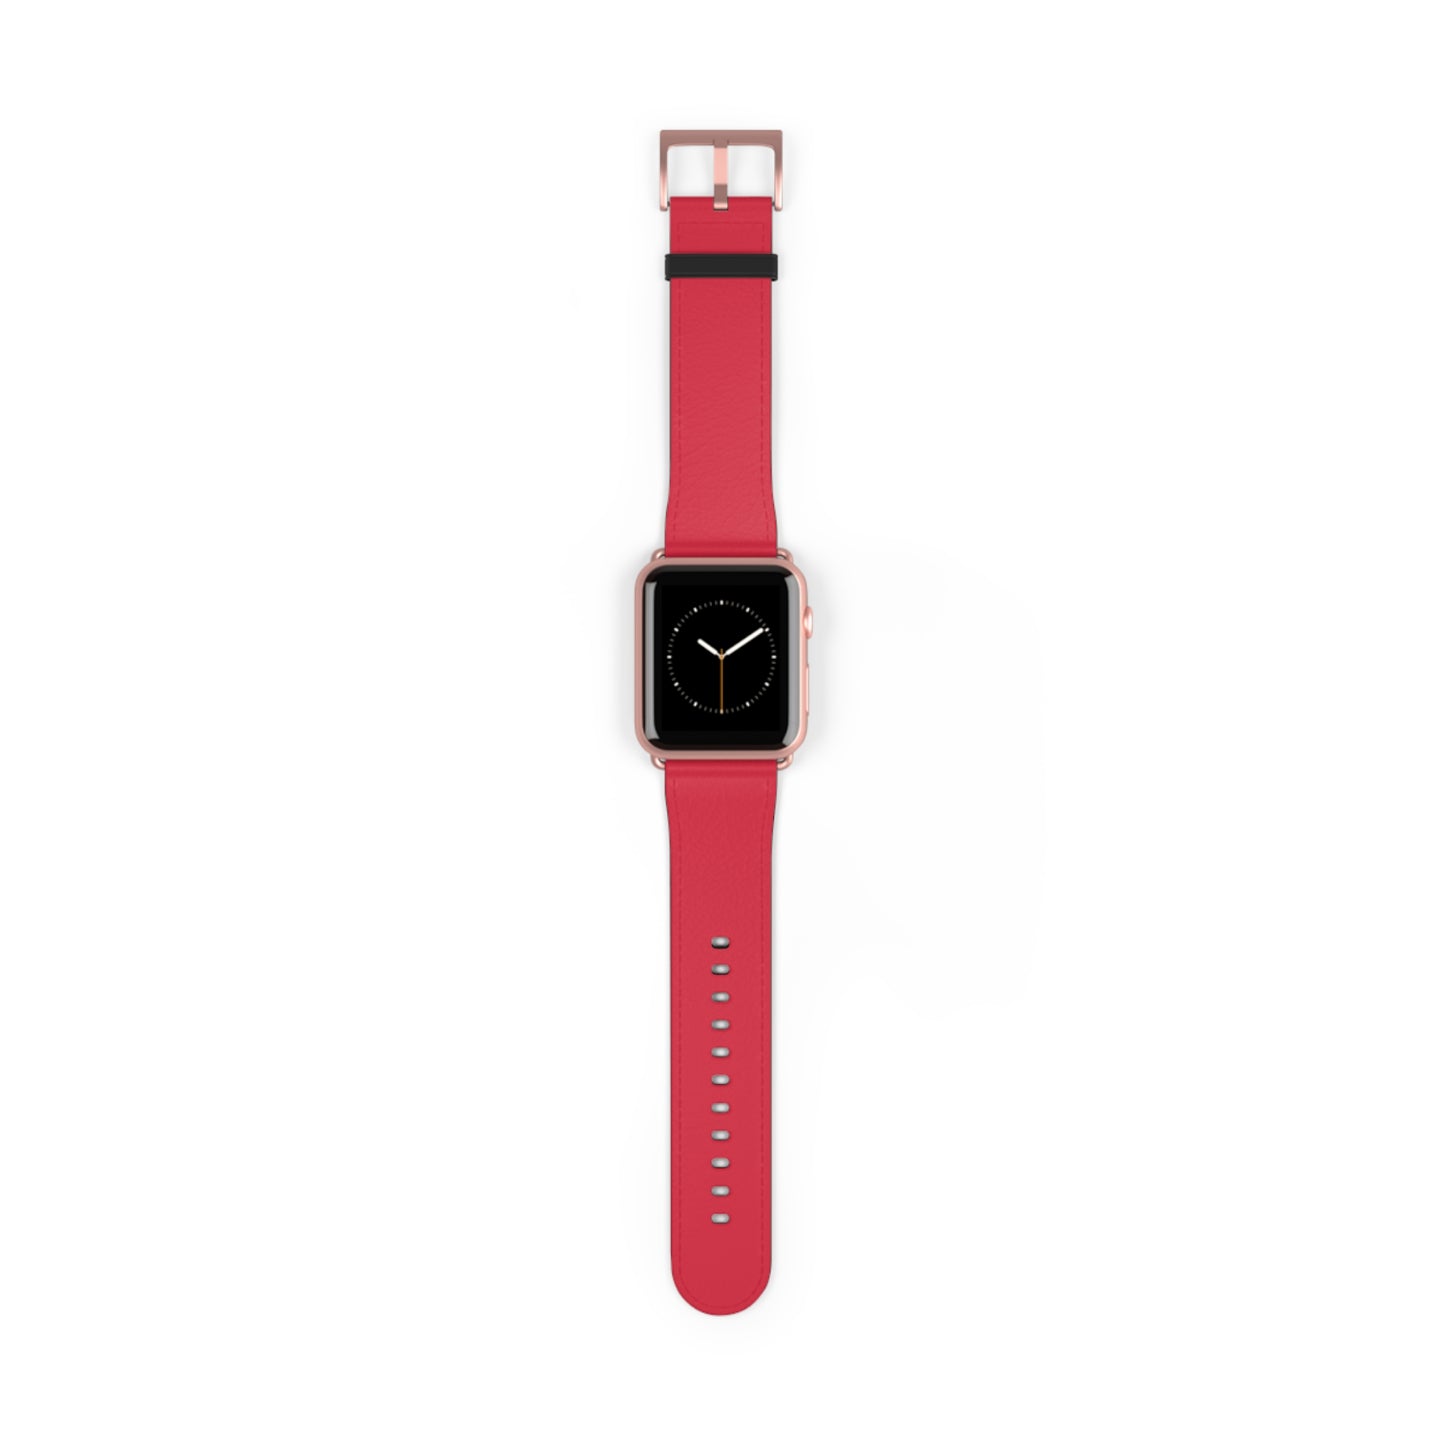 RED APPLE® WATCH BAND- PANTONE® 206